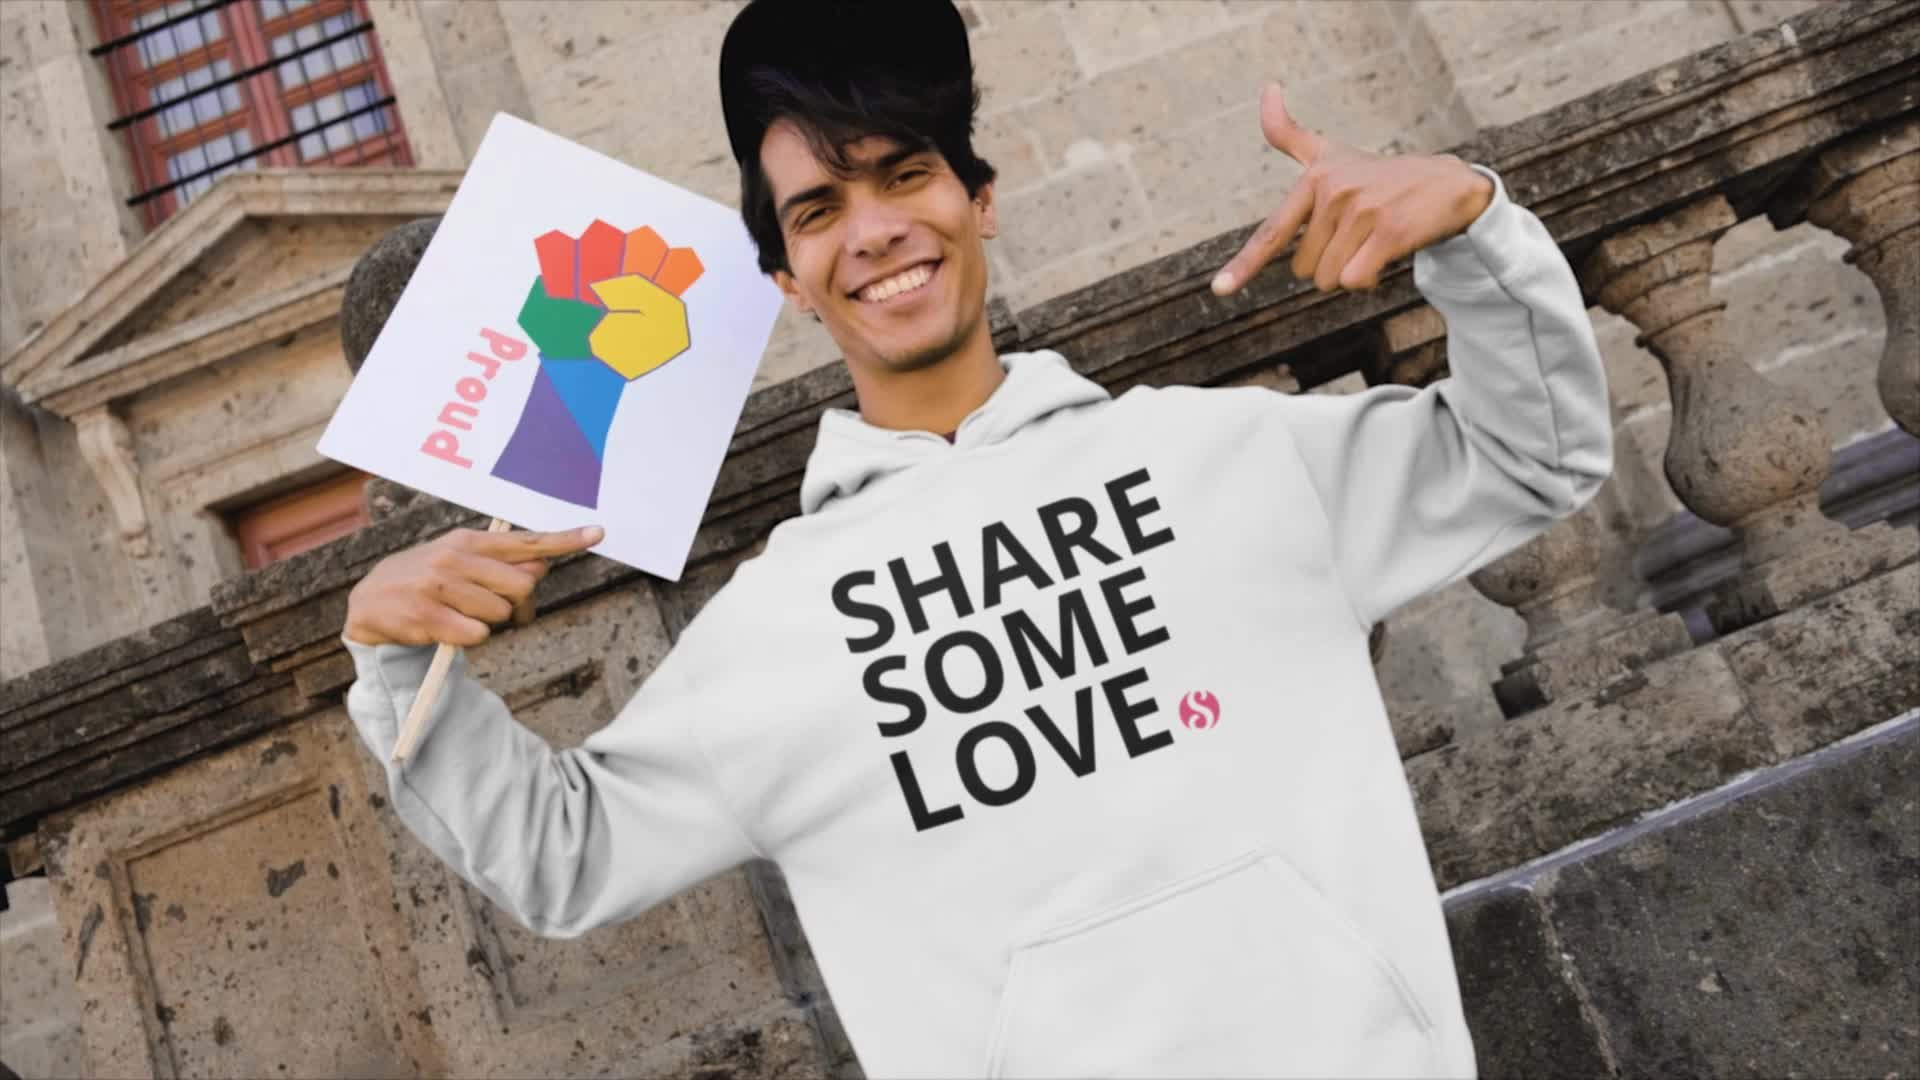 Video by Sharesome with the username @Sharesome, who is a admin user,  August 12, 2021 at 4:43 PM. The post is about the topic SharesomeLove and the text says 'Hello lovely people of Sharesome,

while we are working on new features for the platform, we want you all to #SharesomeLove in real life too.

That works certainly best with a Sharesome or Flame shirt that you can order now in our brand new love-store:..'